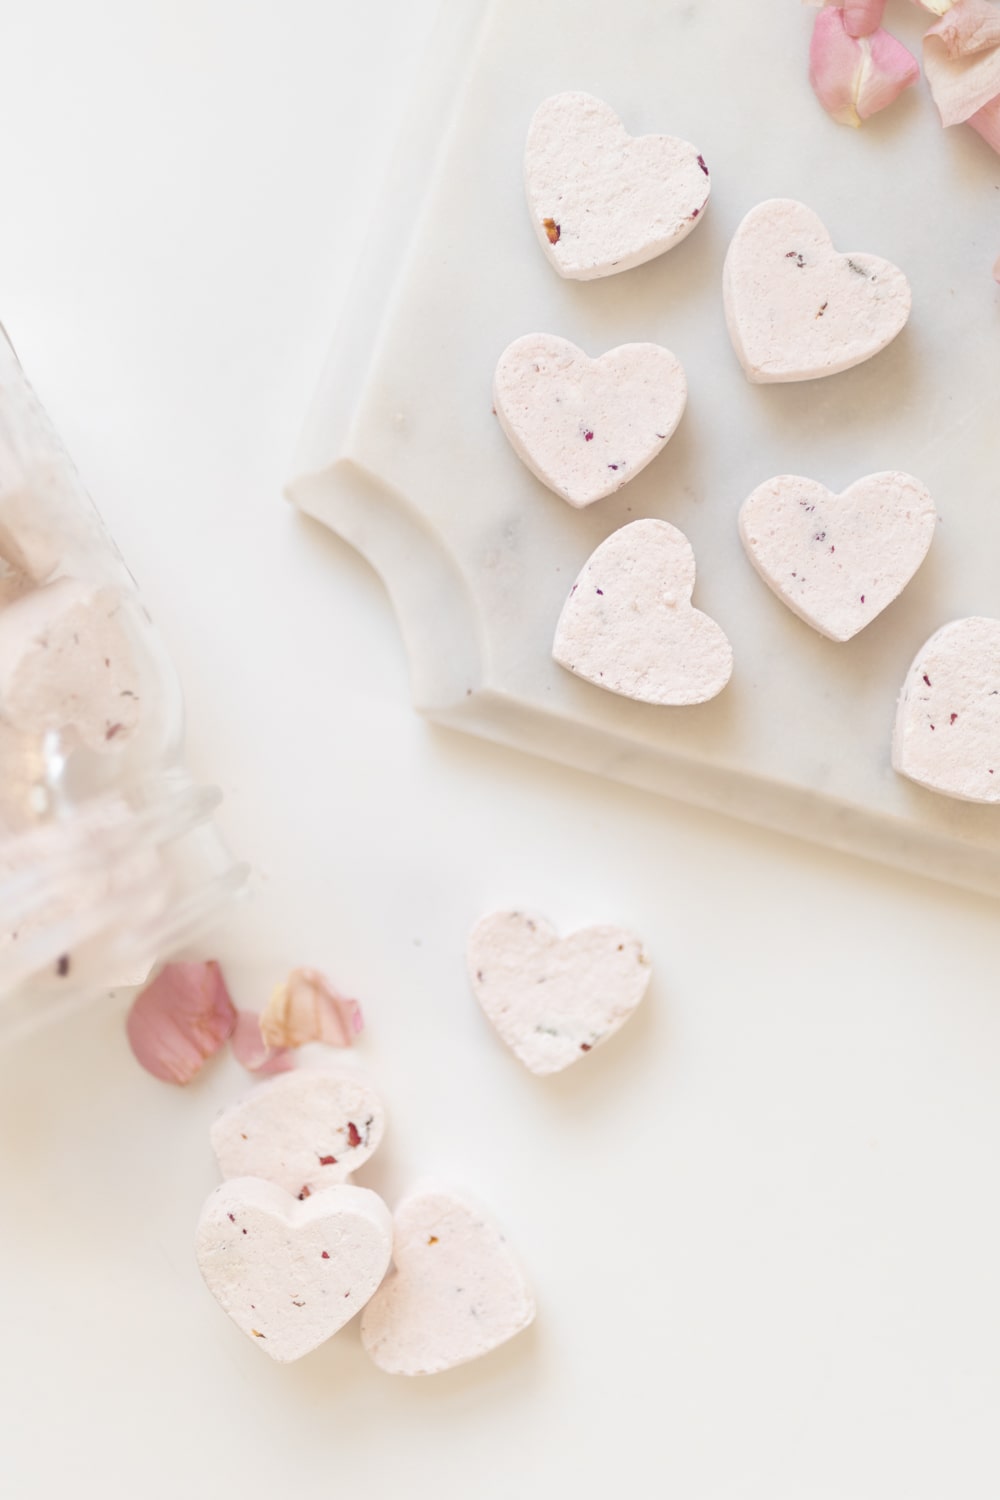 Rose shower melts recipe from blogger Stephanie Ziajka on Diary of a Debutante